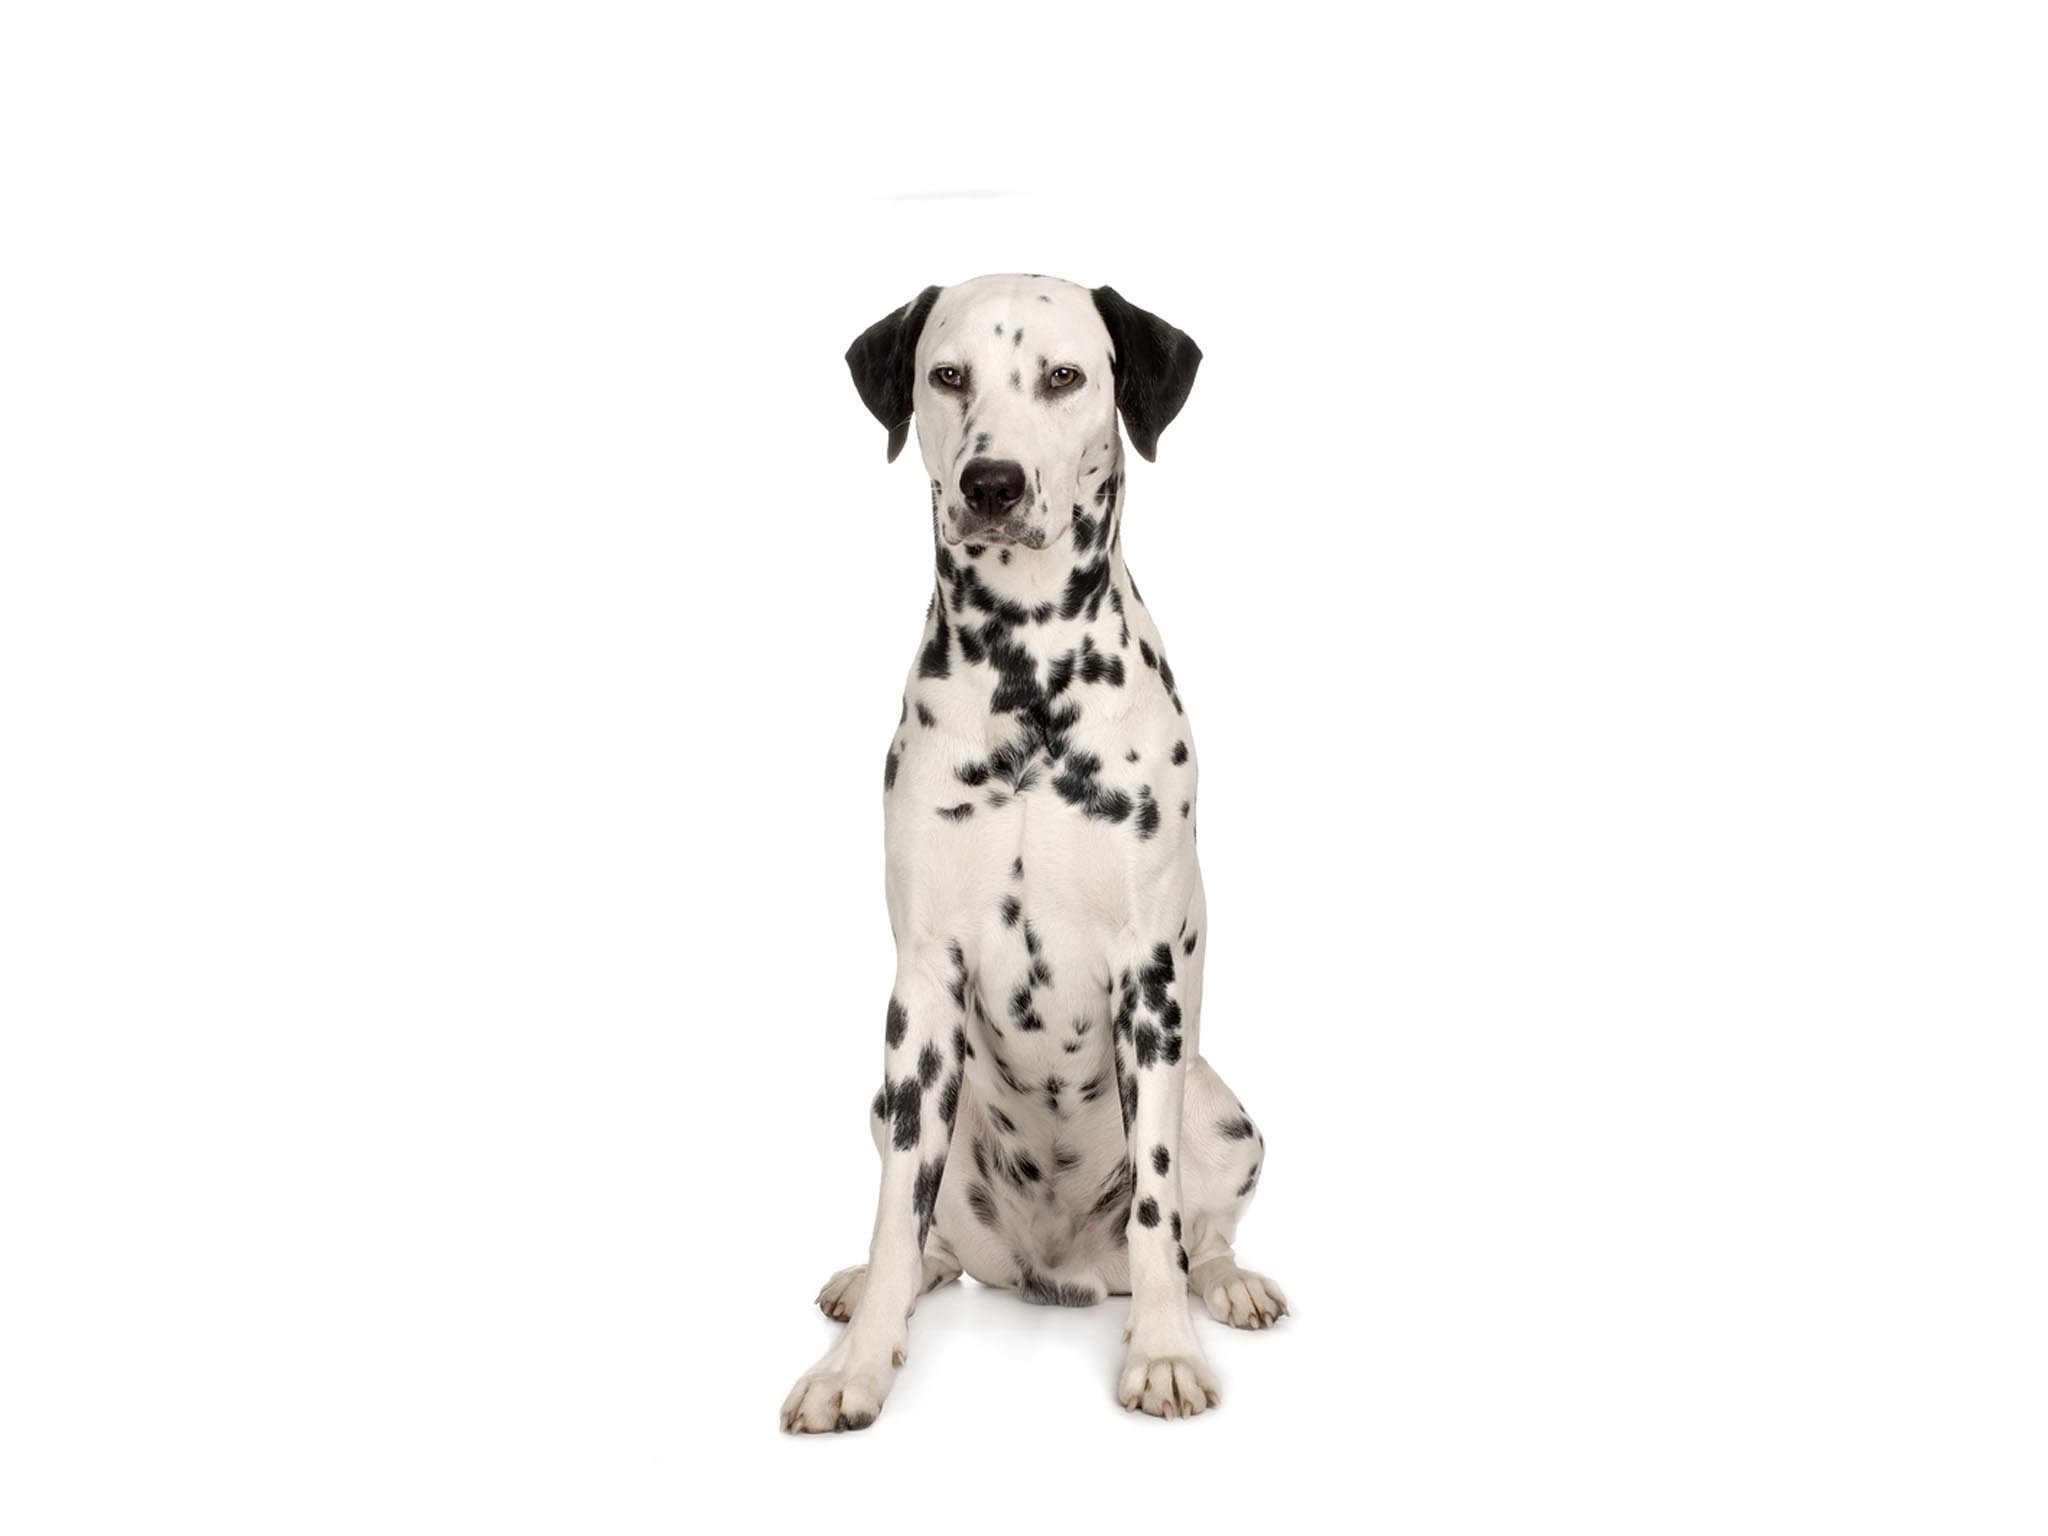 2048x1536 Dalmatian Wallpaper Dogs Animals Wallpapers in jpg format for free .